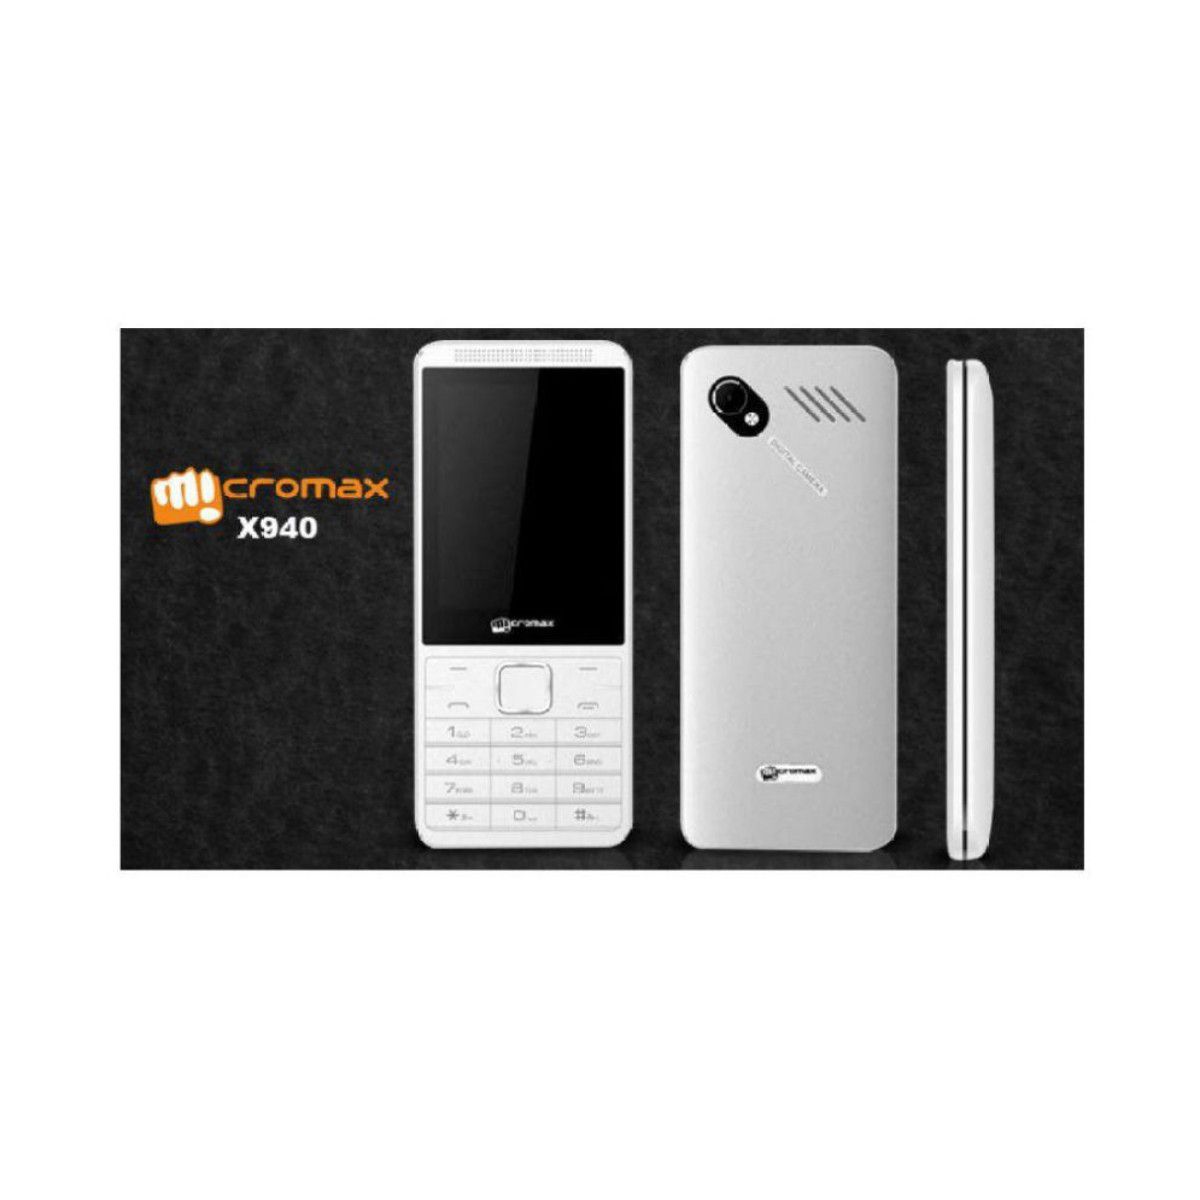 Micromax X940 White Feature Phone Online At Low Prices Snapdeal India